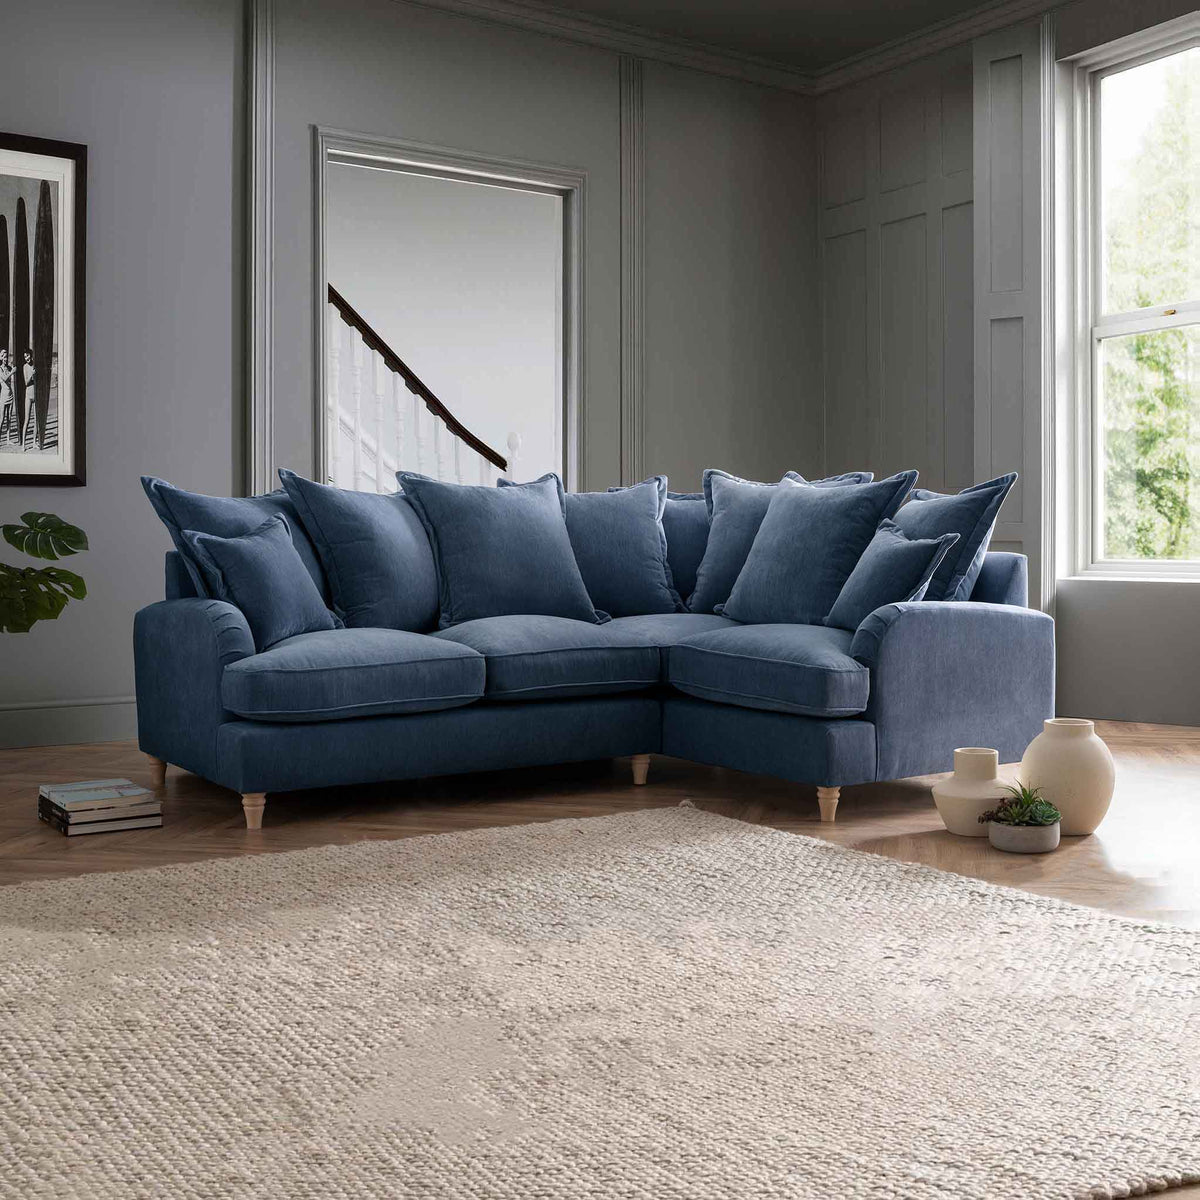 Rupert Navy Blue 2 Corner 1 Right Hand Sofa Couch for living room